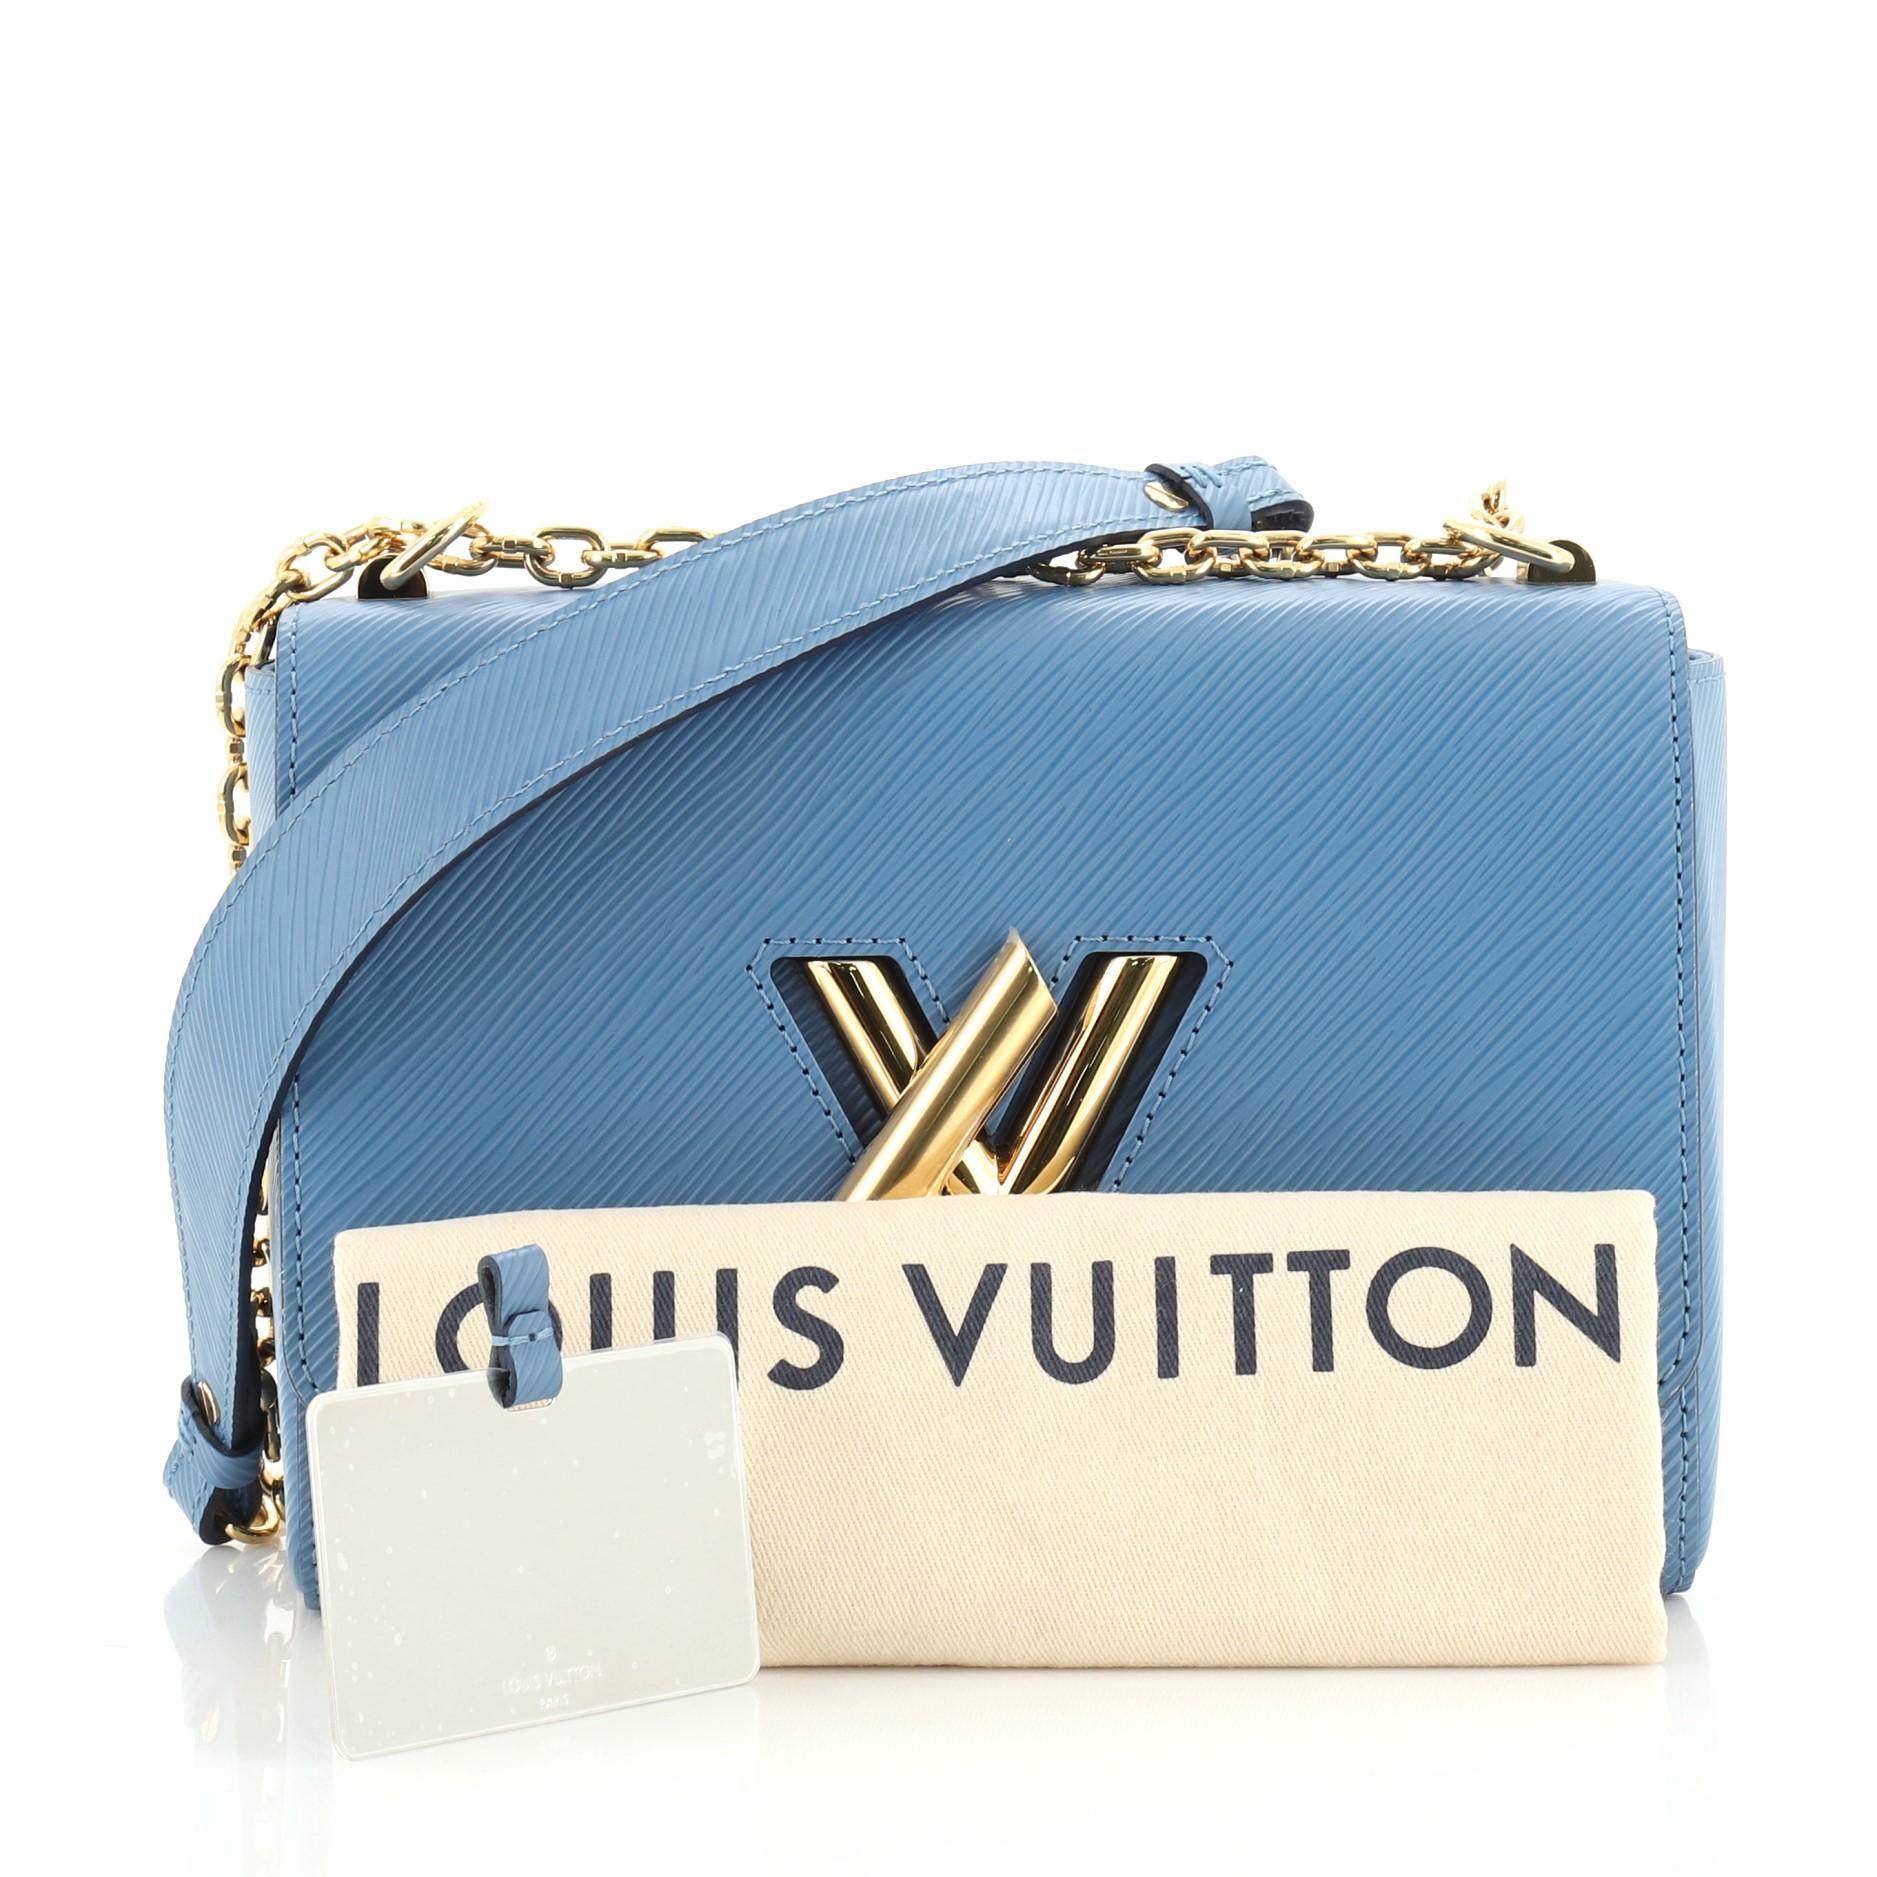 This Louis Vuitton Twist Handbag Epi Leather MM, crafted from blue epi leather, features chain link strap with leather pad, frontal flap, and gold-tone hardware. Its LV twist lock closure opens to a blue microfiber interior with slip pockets.